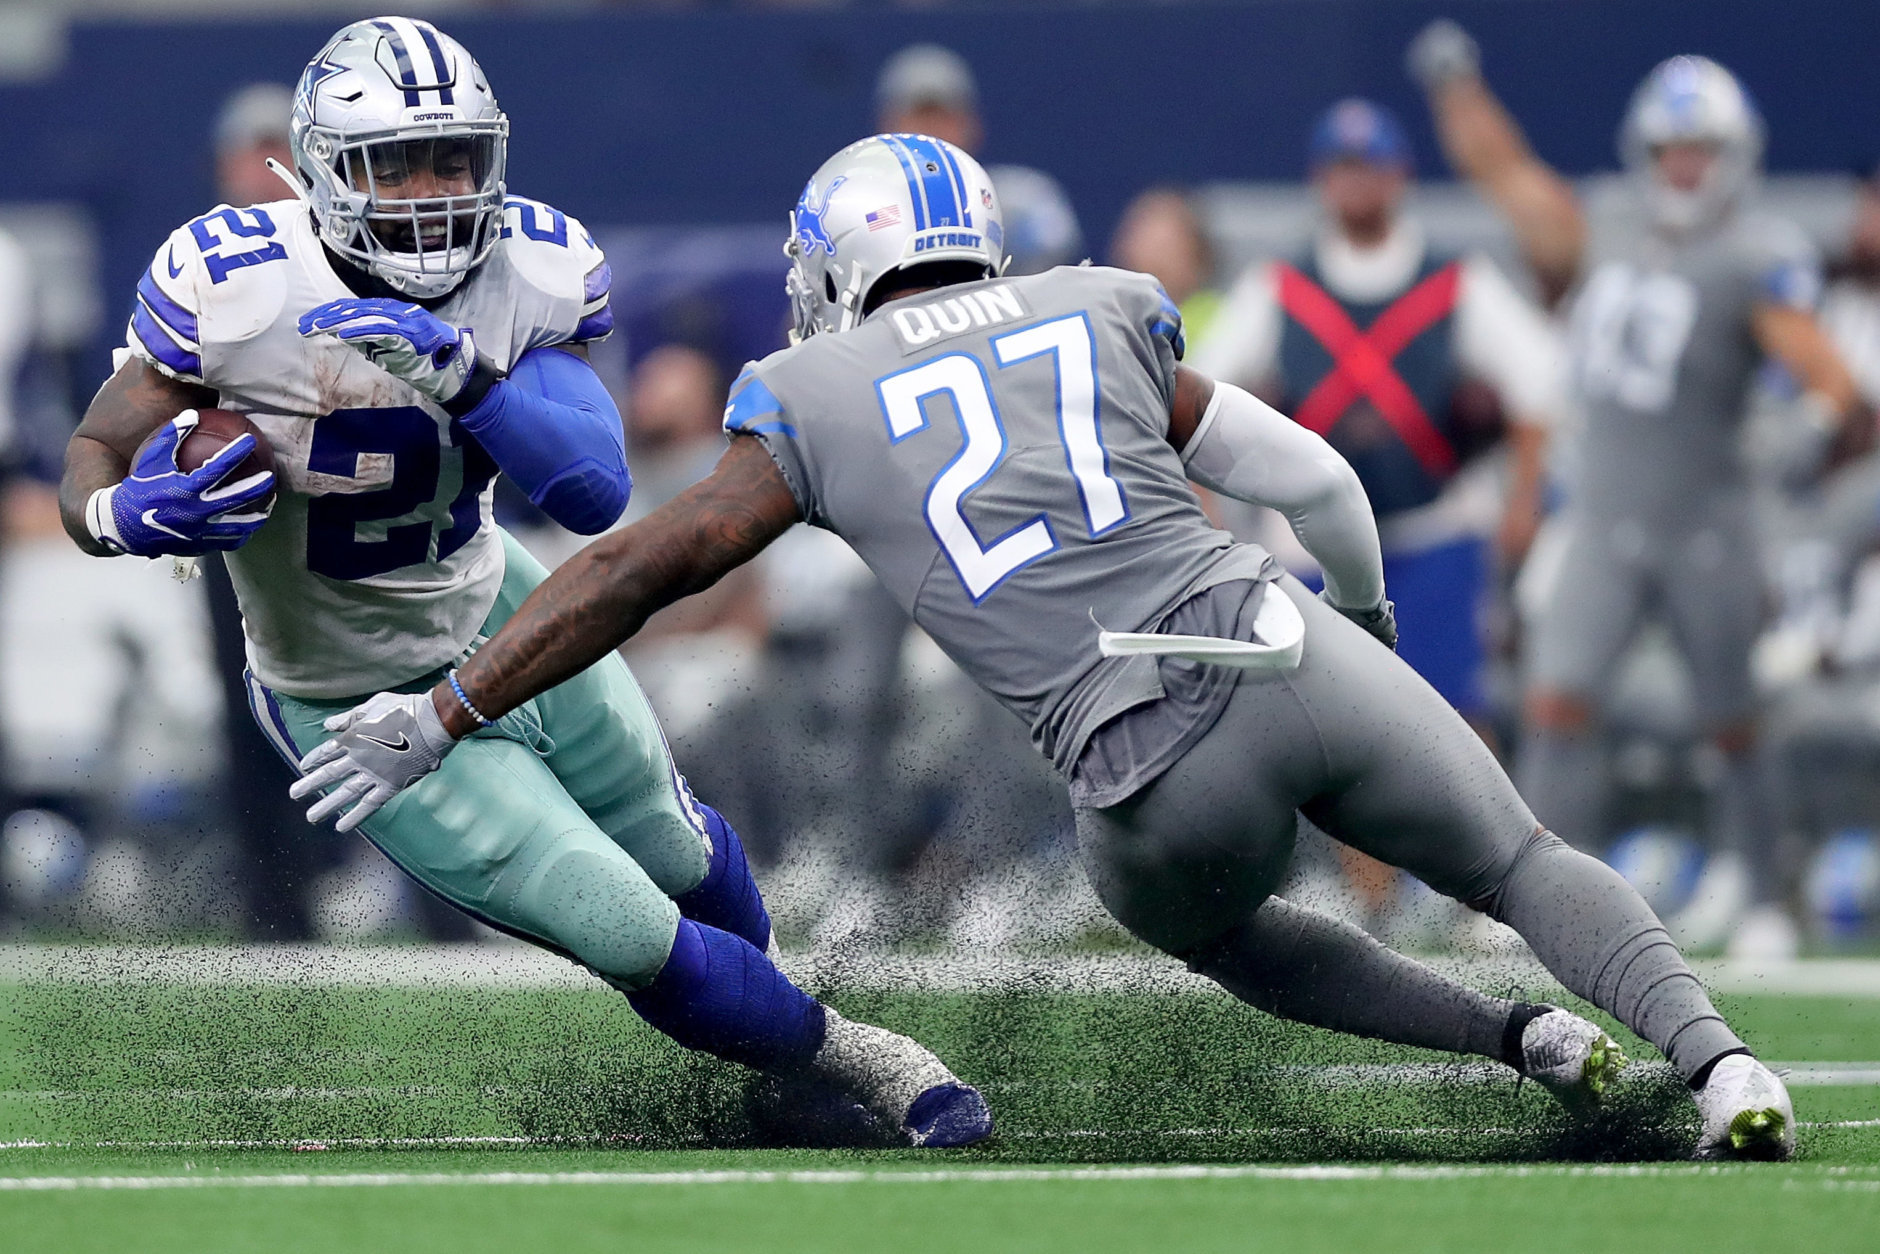 ARLINGTON, TX - SEPTEMBER 30:  Ezekiel Elliott #21 of the Dallas Cowboys carries the ball against Glover Quin #27 of the Detroit Lions in the fourth quarter at AT&amp;T Stadium on September 30, 2018 in Arlington, Texas.  (Photo by Tom Pennington/Getty Images)